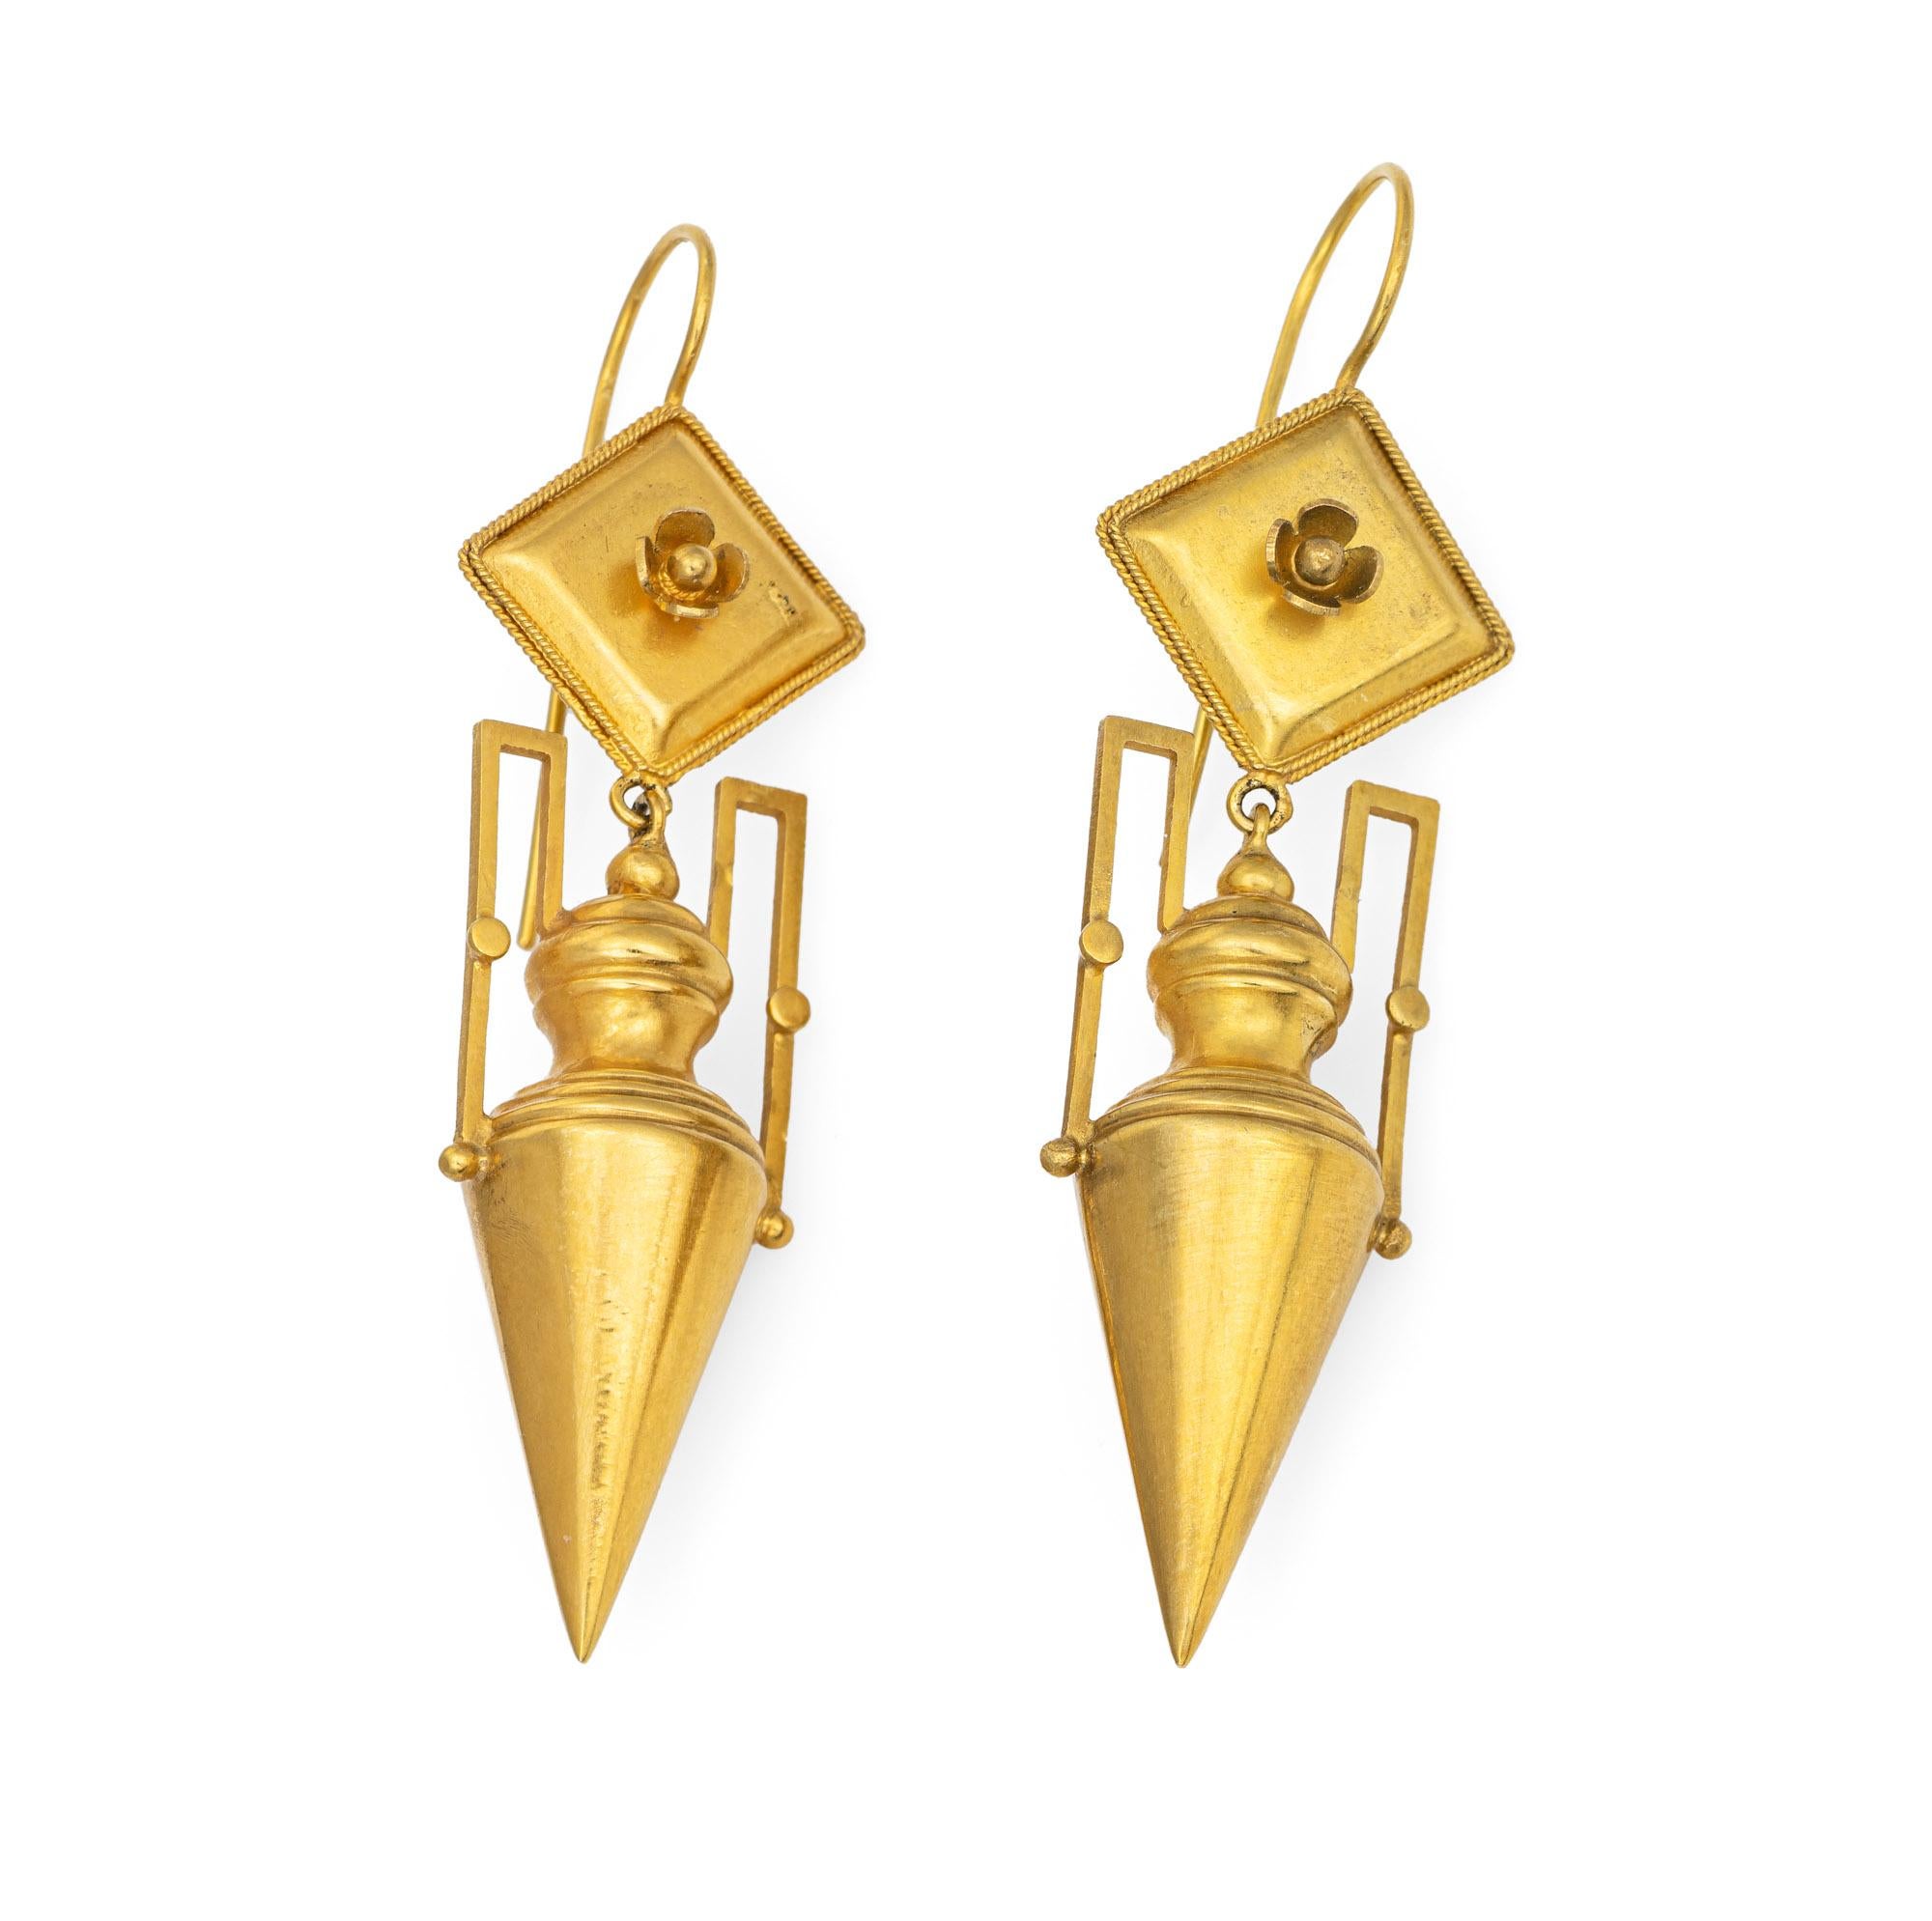 Exceptional pair of antique Victorian amphora drop earrings (circa 1870s) crafted in 15k yellow gold. 

The charming earrings are crafted as Amphorae, most often fashioned in ceramic, depicted here in 15k yellow gold. The vessels were used by the